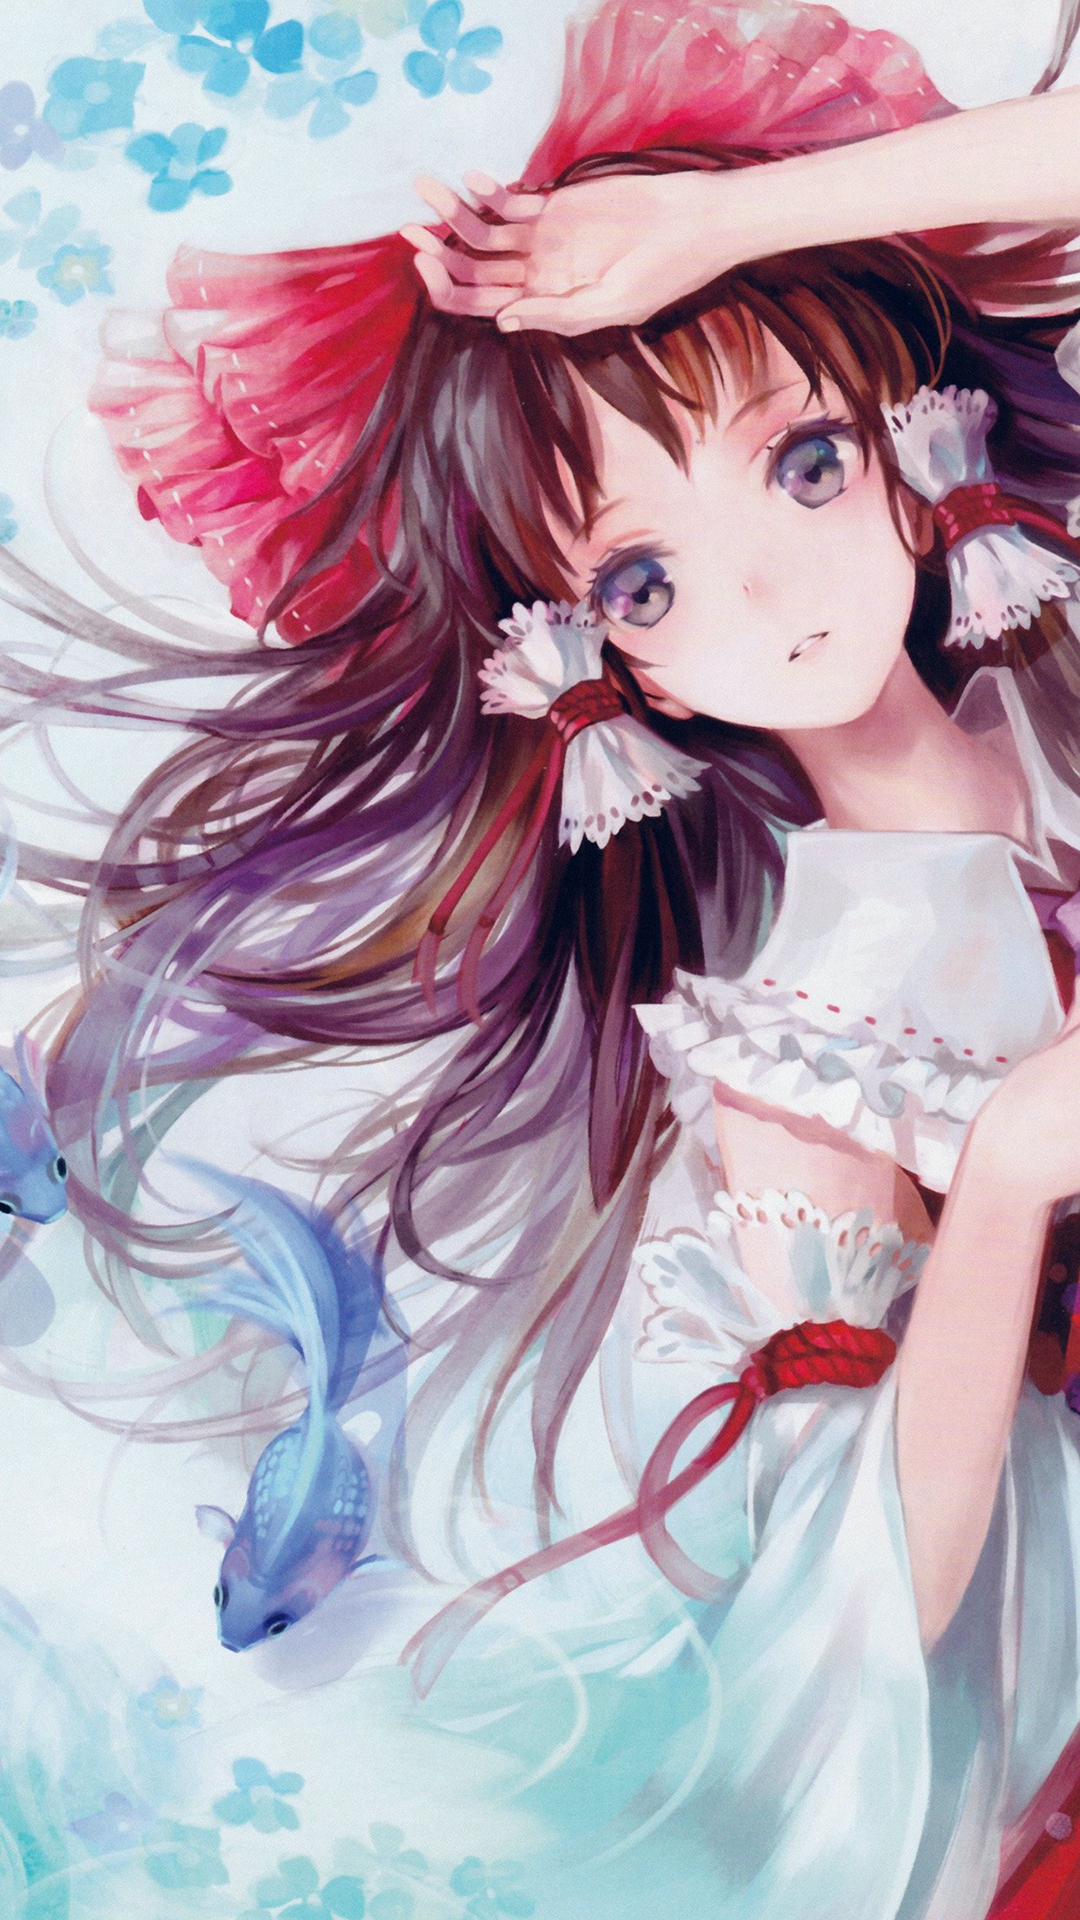 Anime Art Paint Girl Cute iPhone 8 Wallpaper Free Download